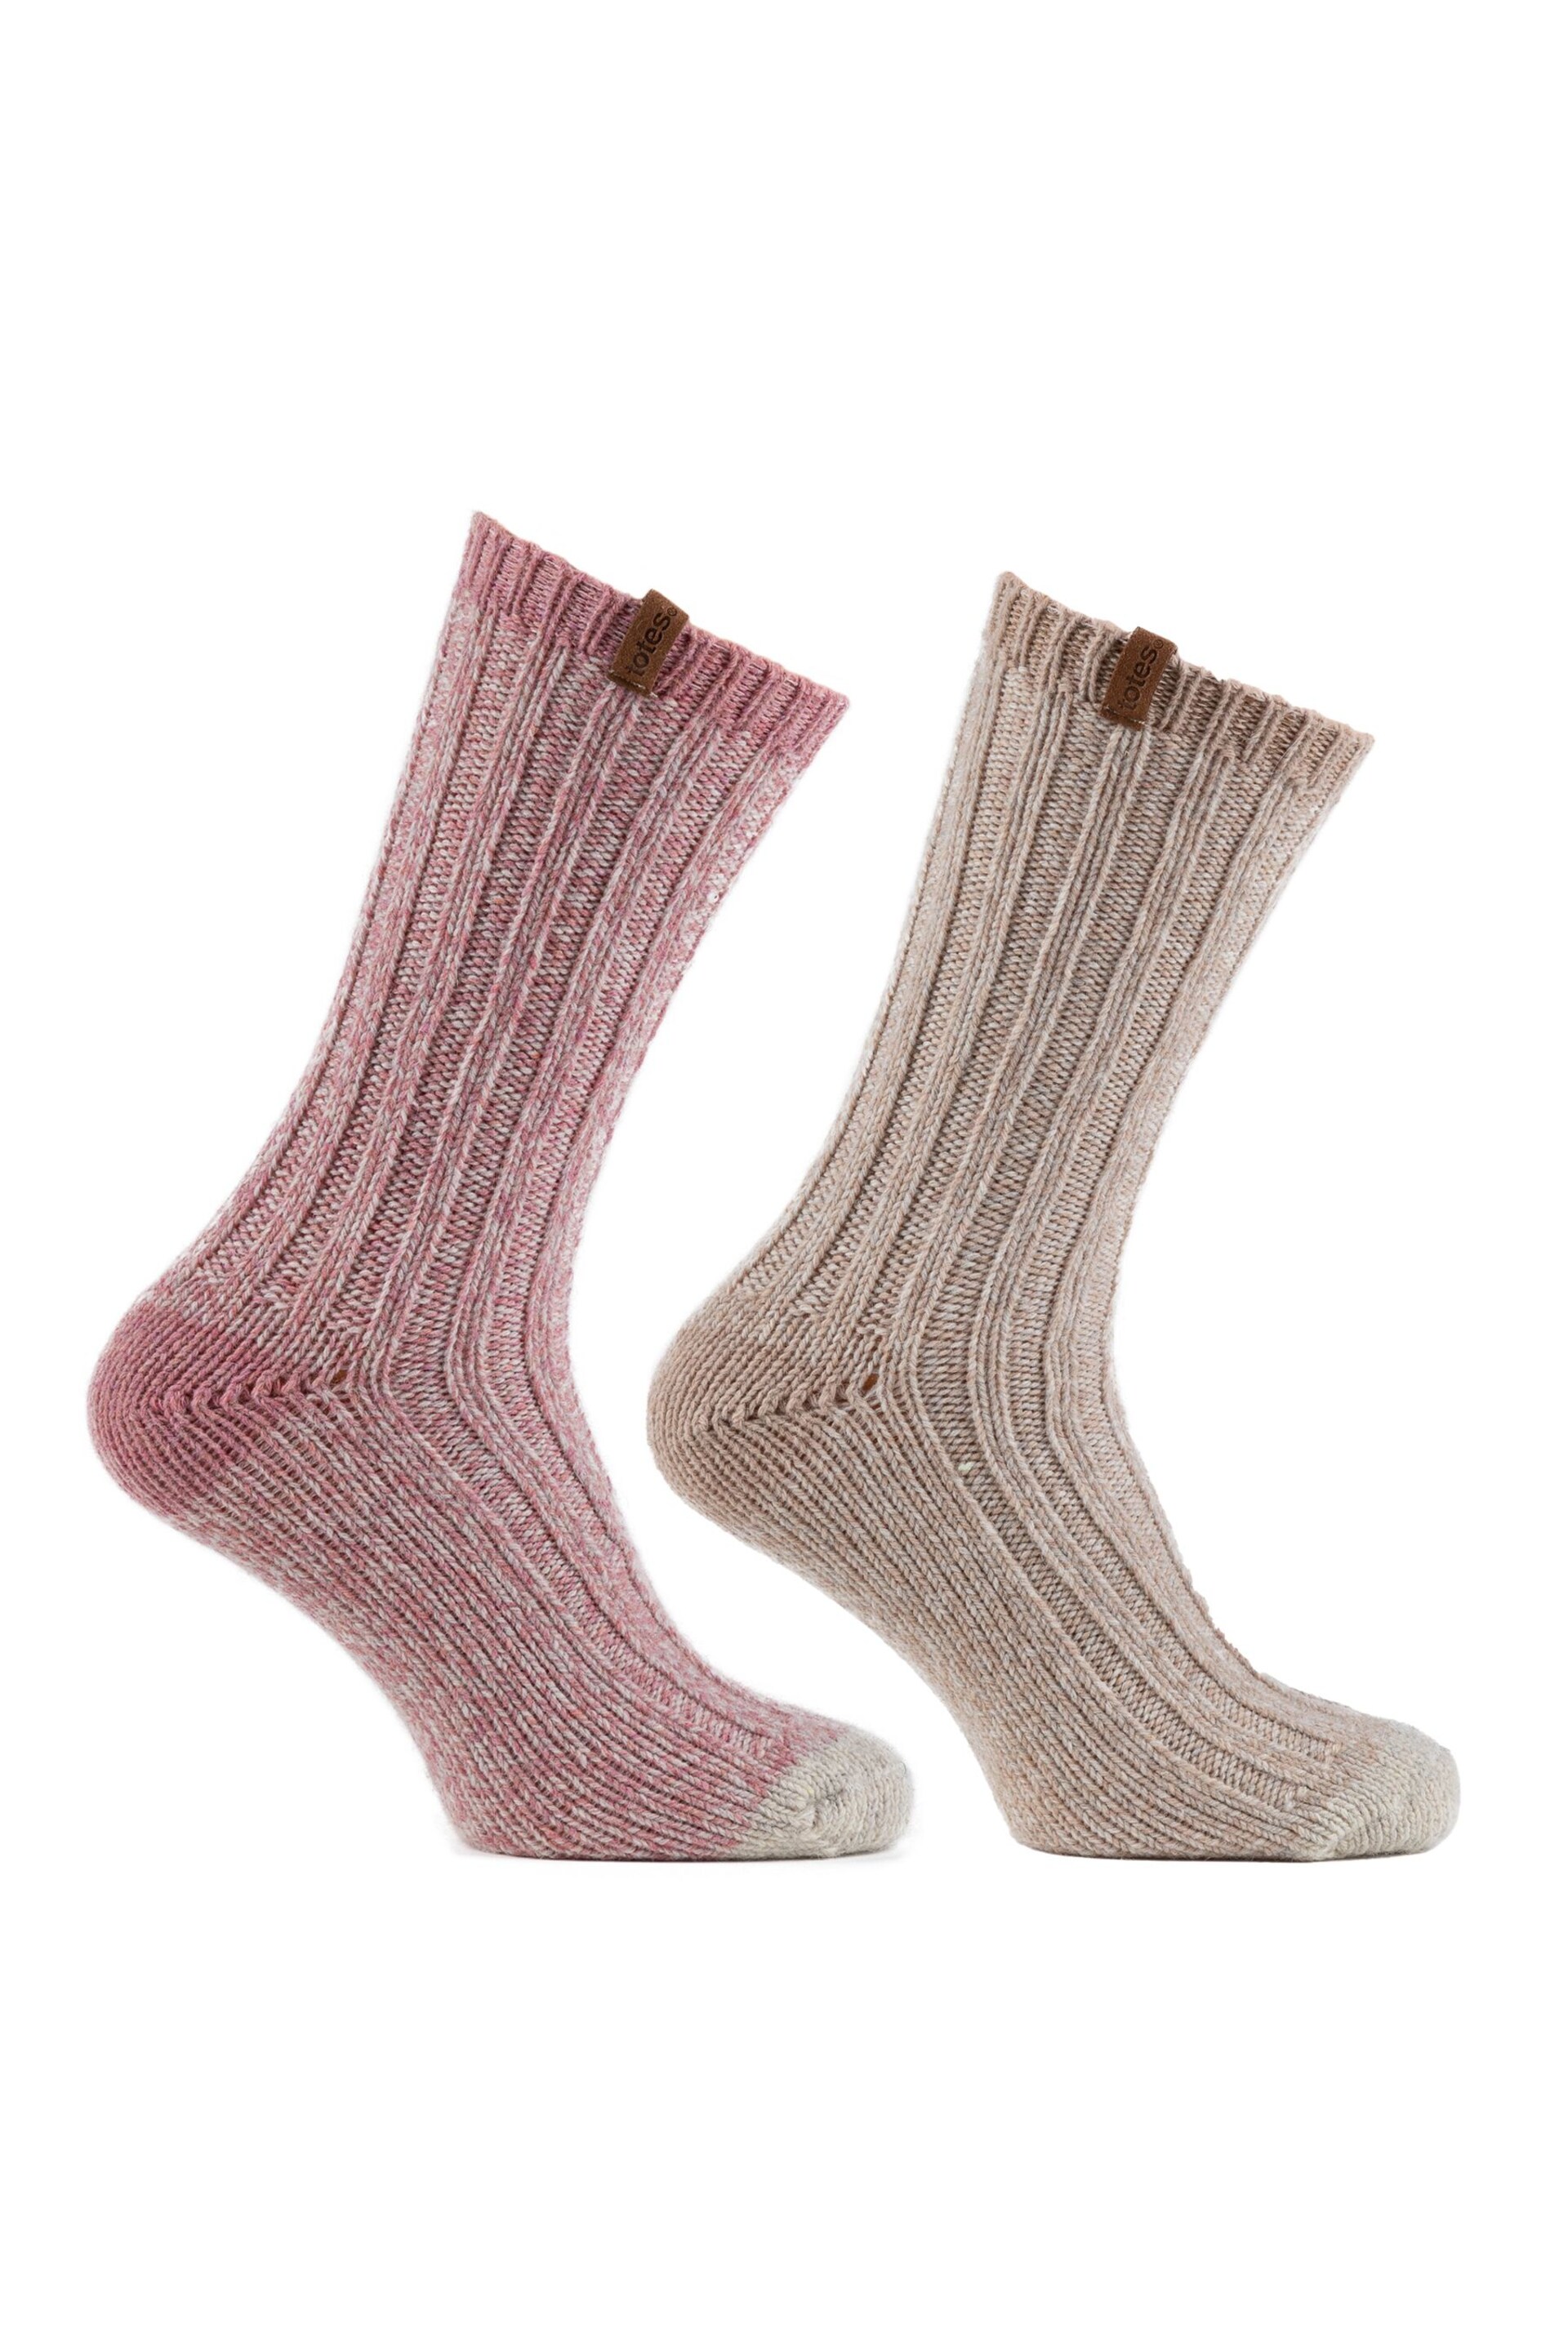 Totes Pink Twin Pack Thermal Wool Boot Socks - Image 5 of 5